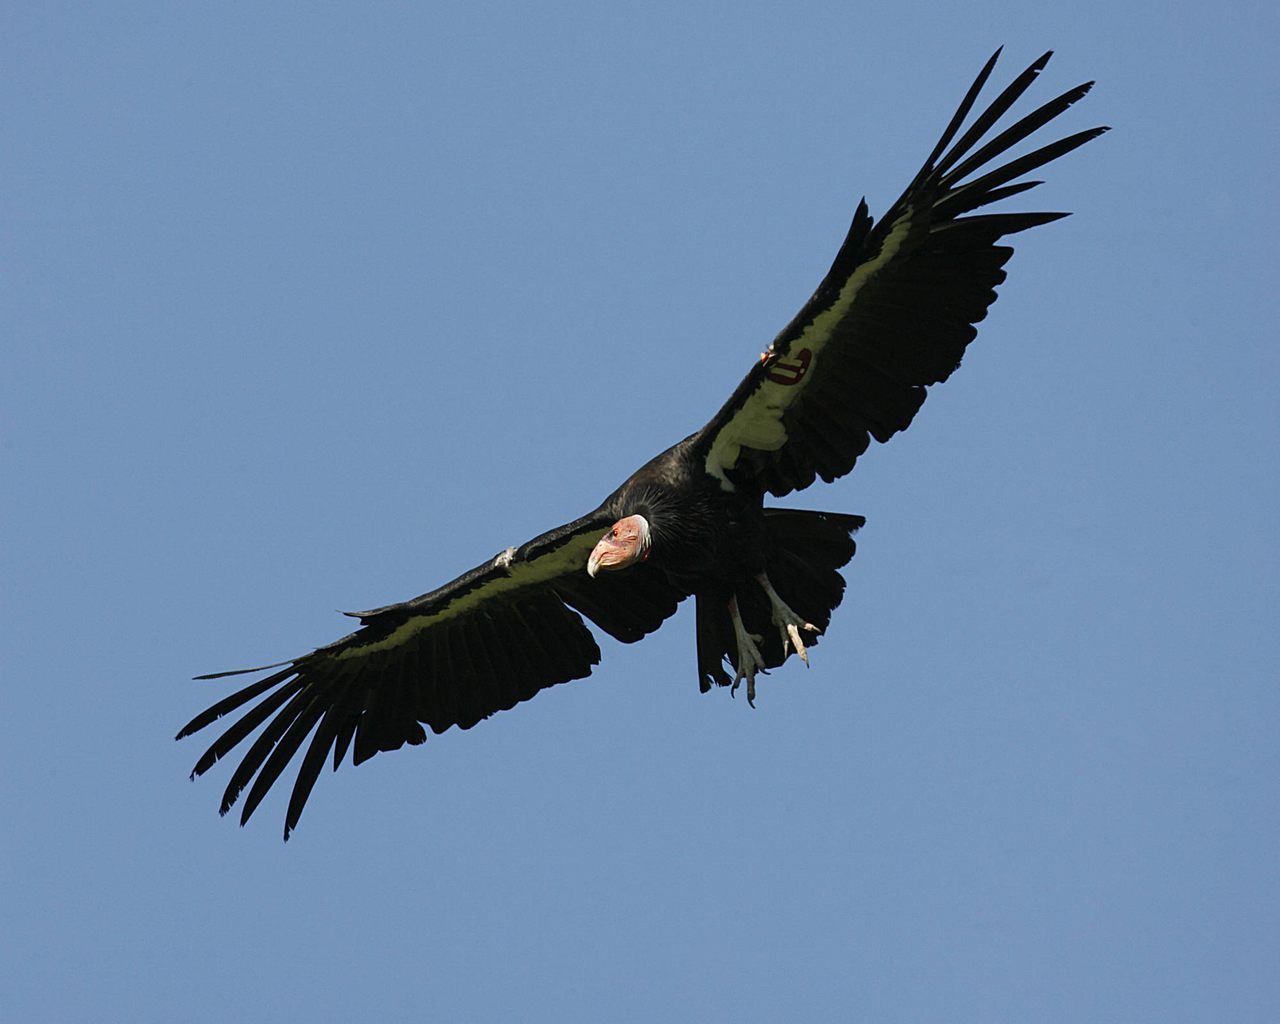 A California condor, the largest North American bird with a wingspan of up to 10 feet.